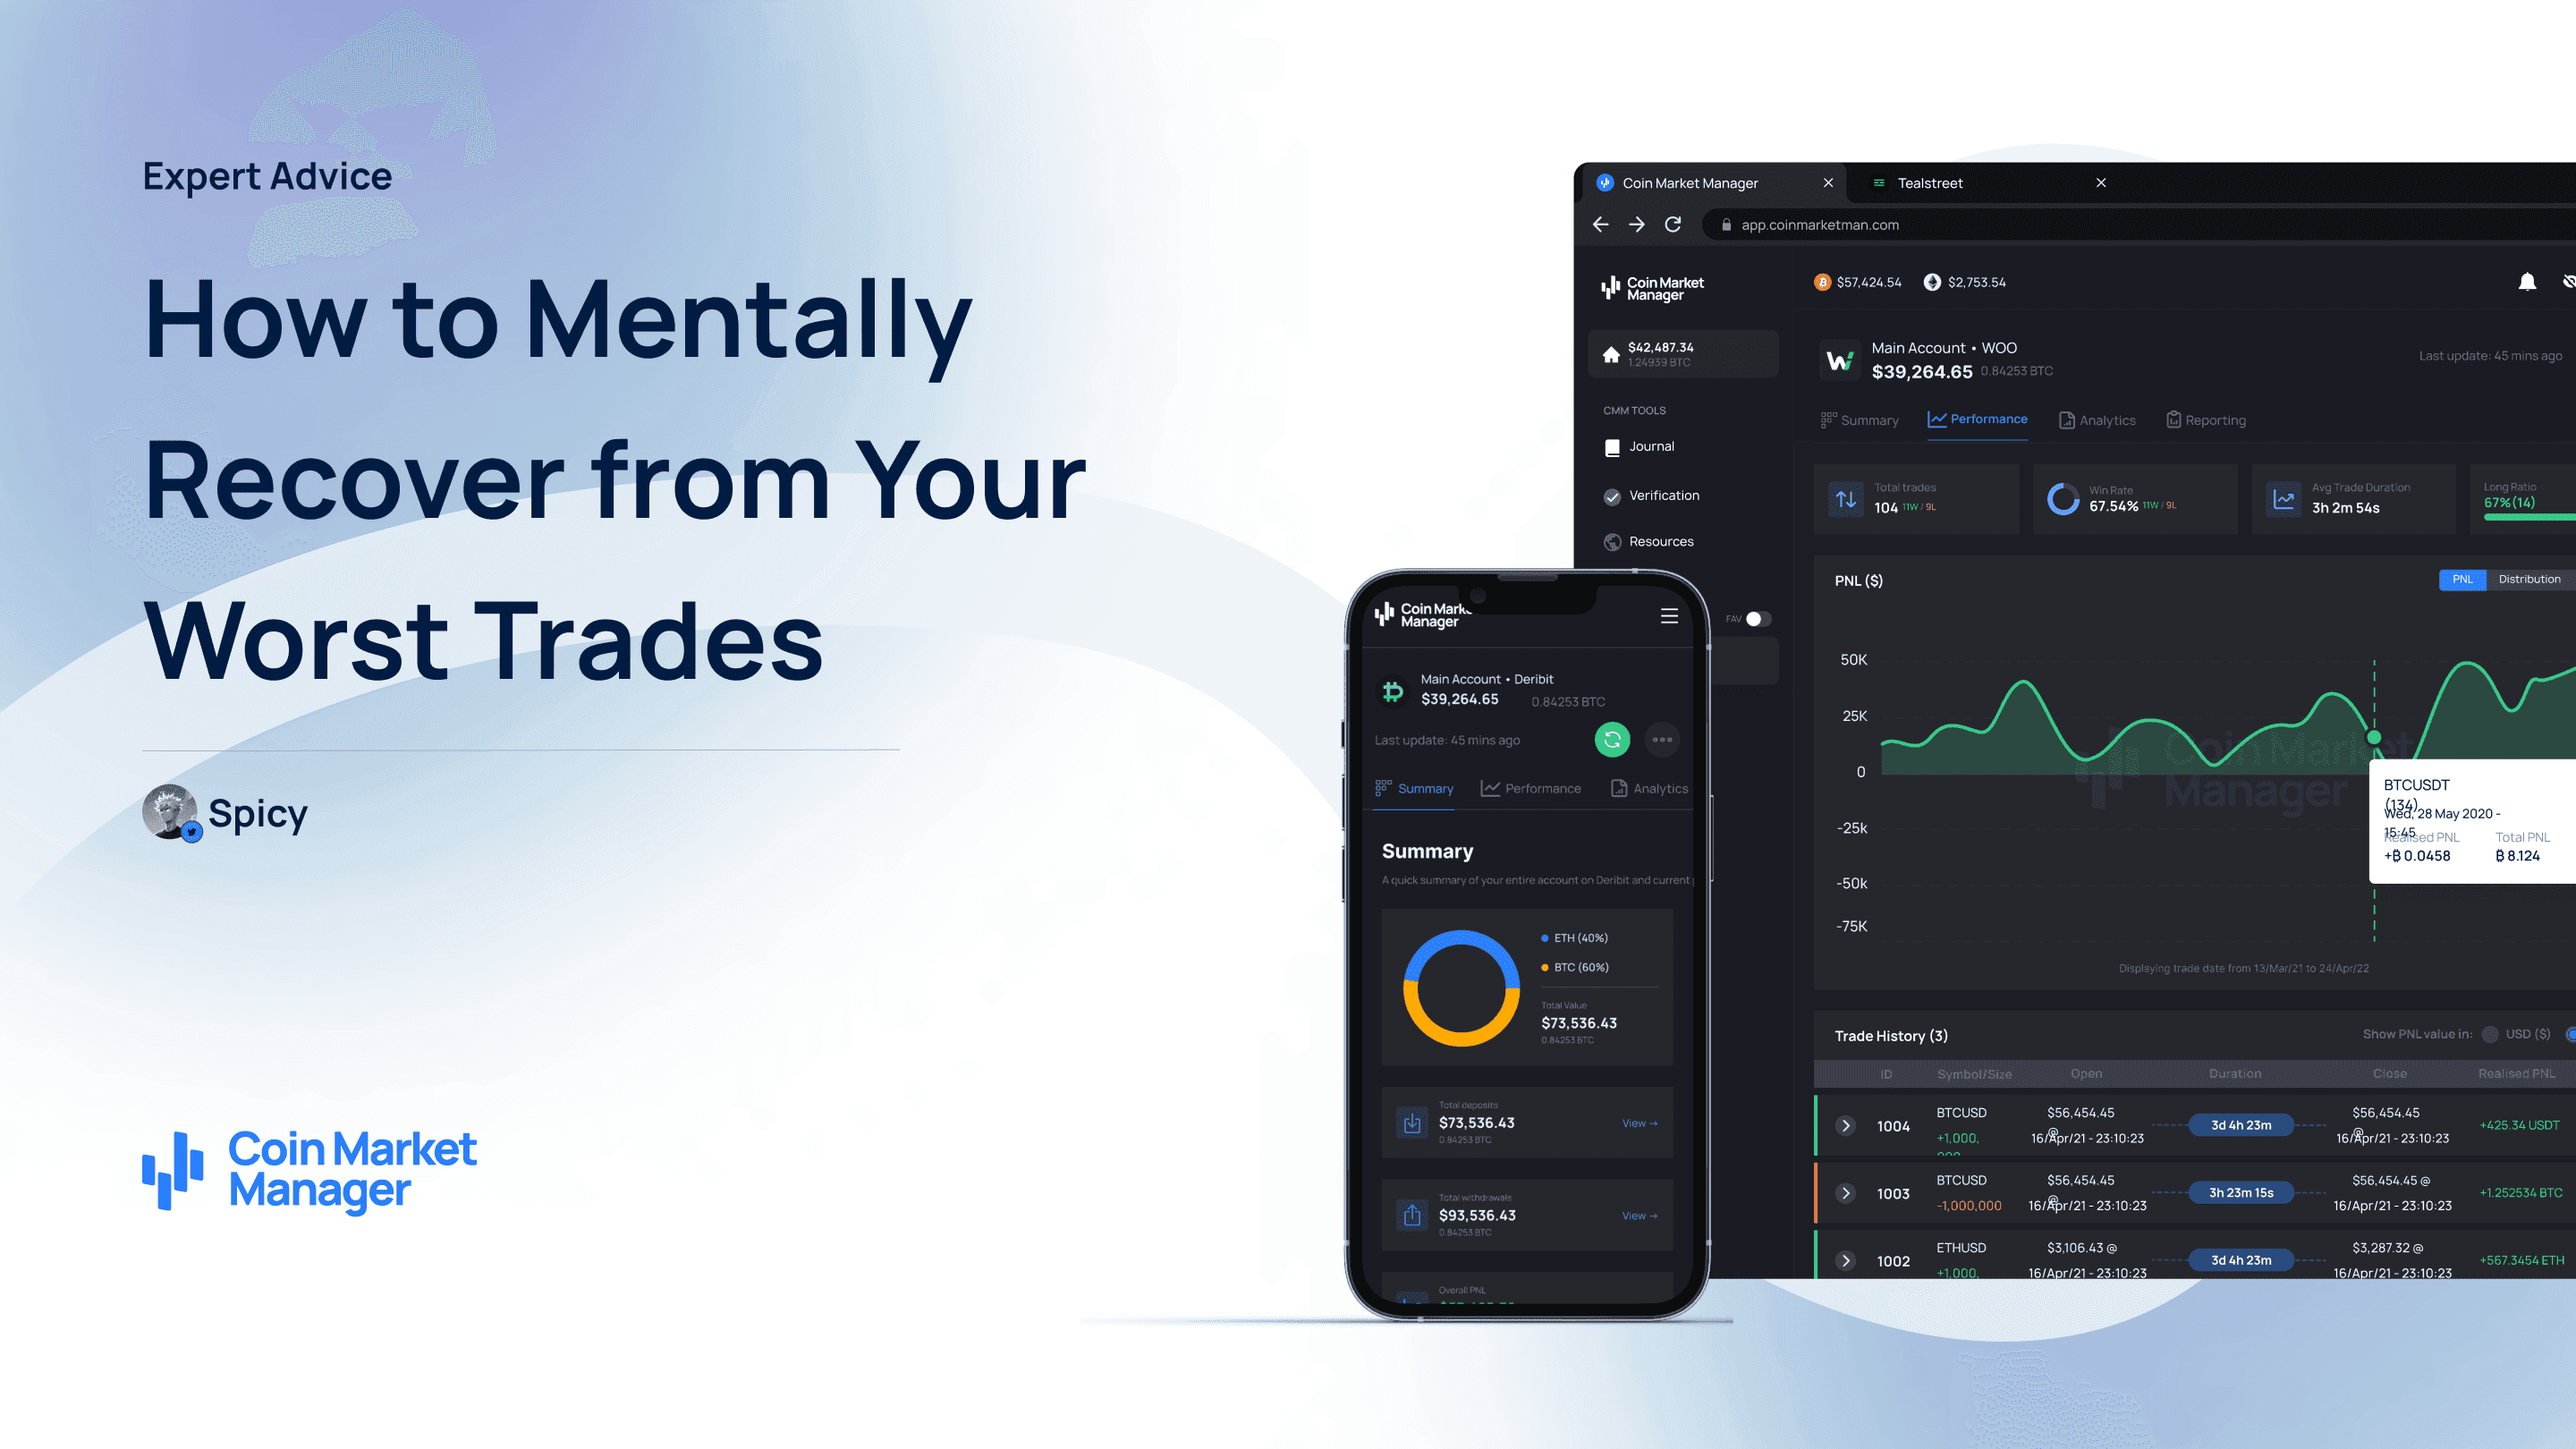 How to Mentally Recover from Your Worst Trades